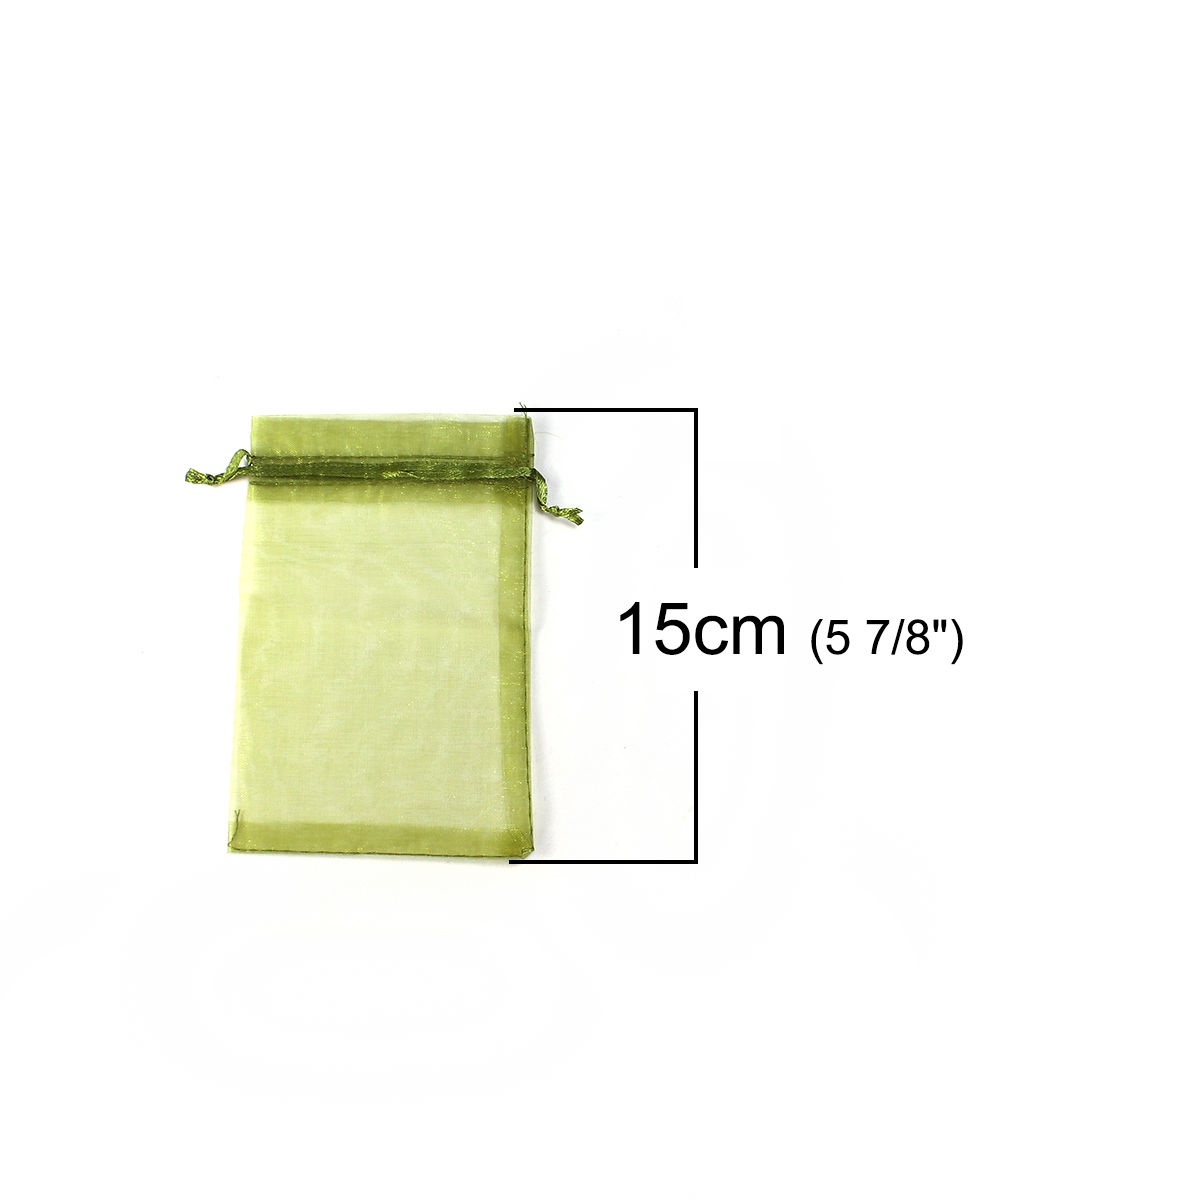 Picture of Wedding Gift Organza Jewelry Bags Drawstring Rectangle At Random (Usable Space: 13x10cm) 15cm(5 7/8") x 10cm(3 7/8"), 20 PCs